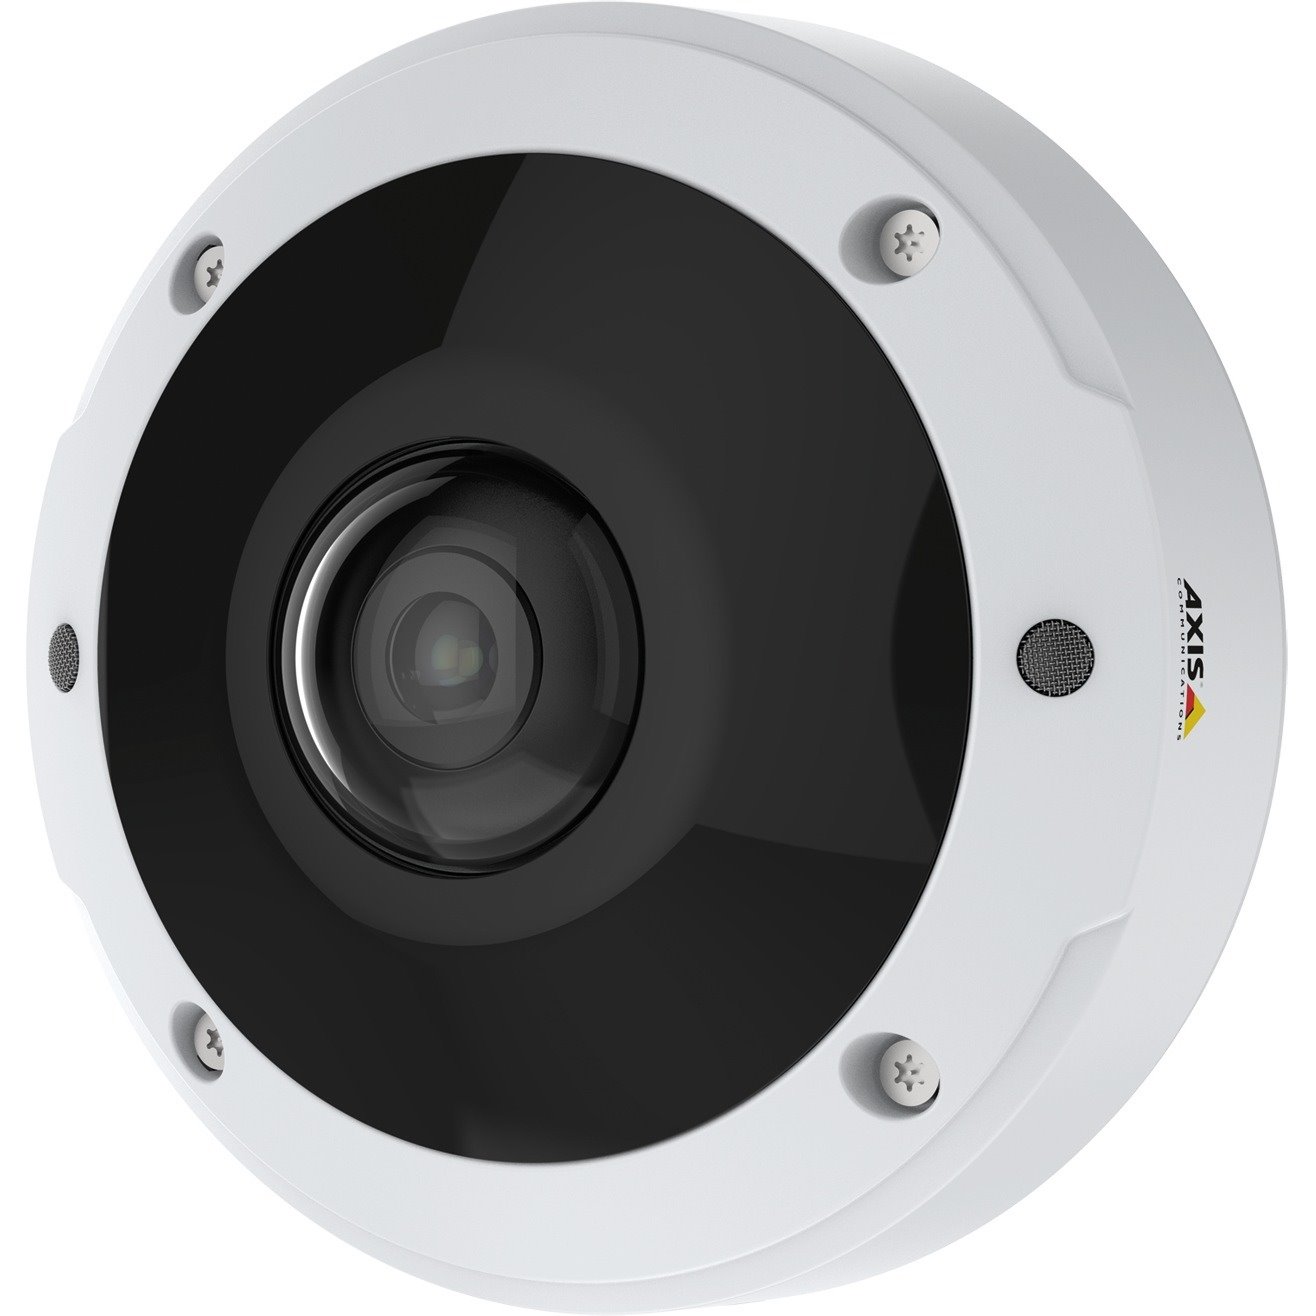 AXIS M3077 6 Megapixel Outdoor HD Network Camera - Colour - Dome - White